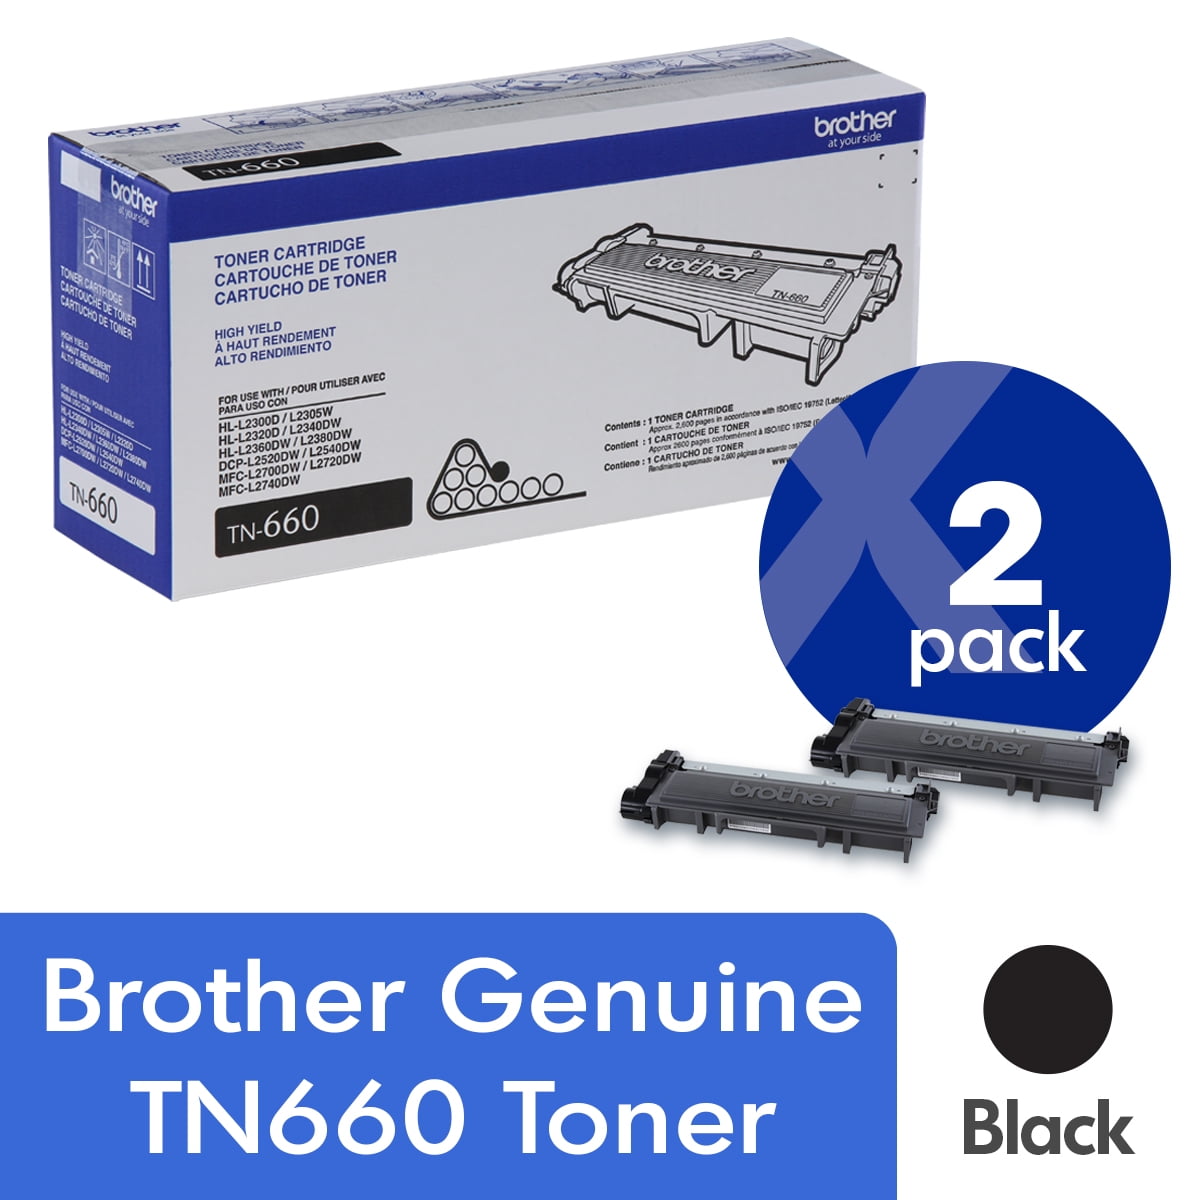 LINKYO LY-BR-V3TN660 Black Toner Cartridge - Compatible with Brother TN-660